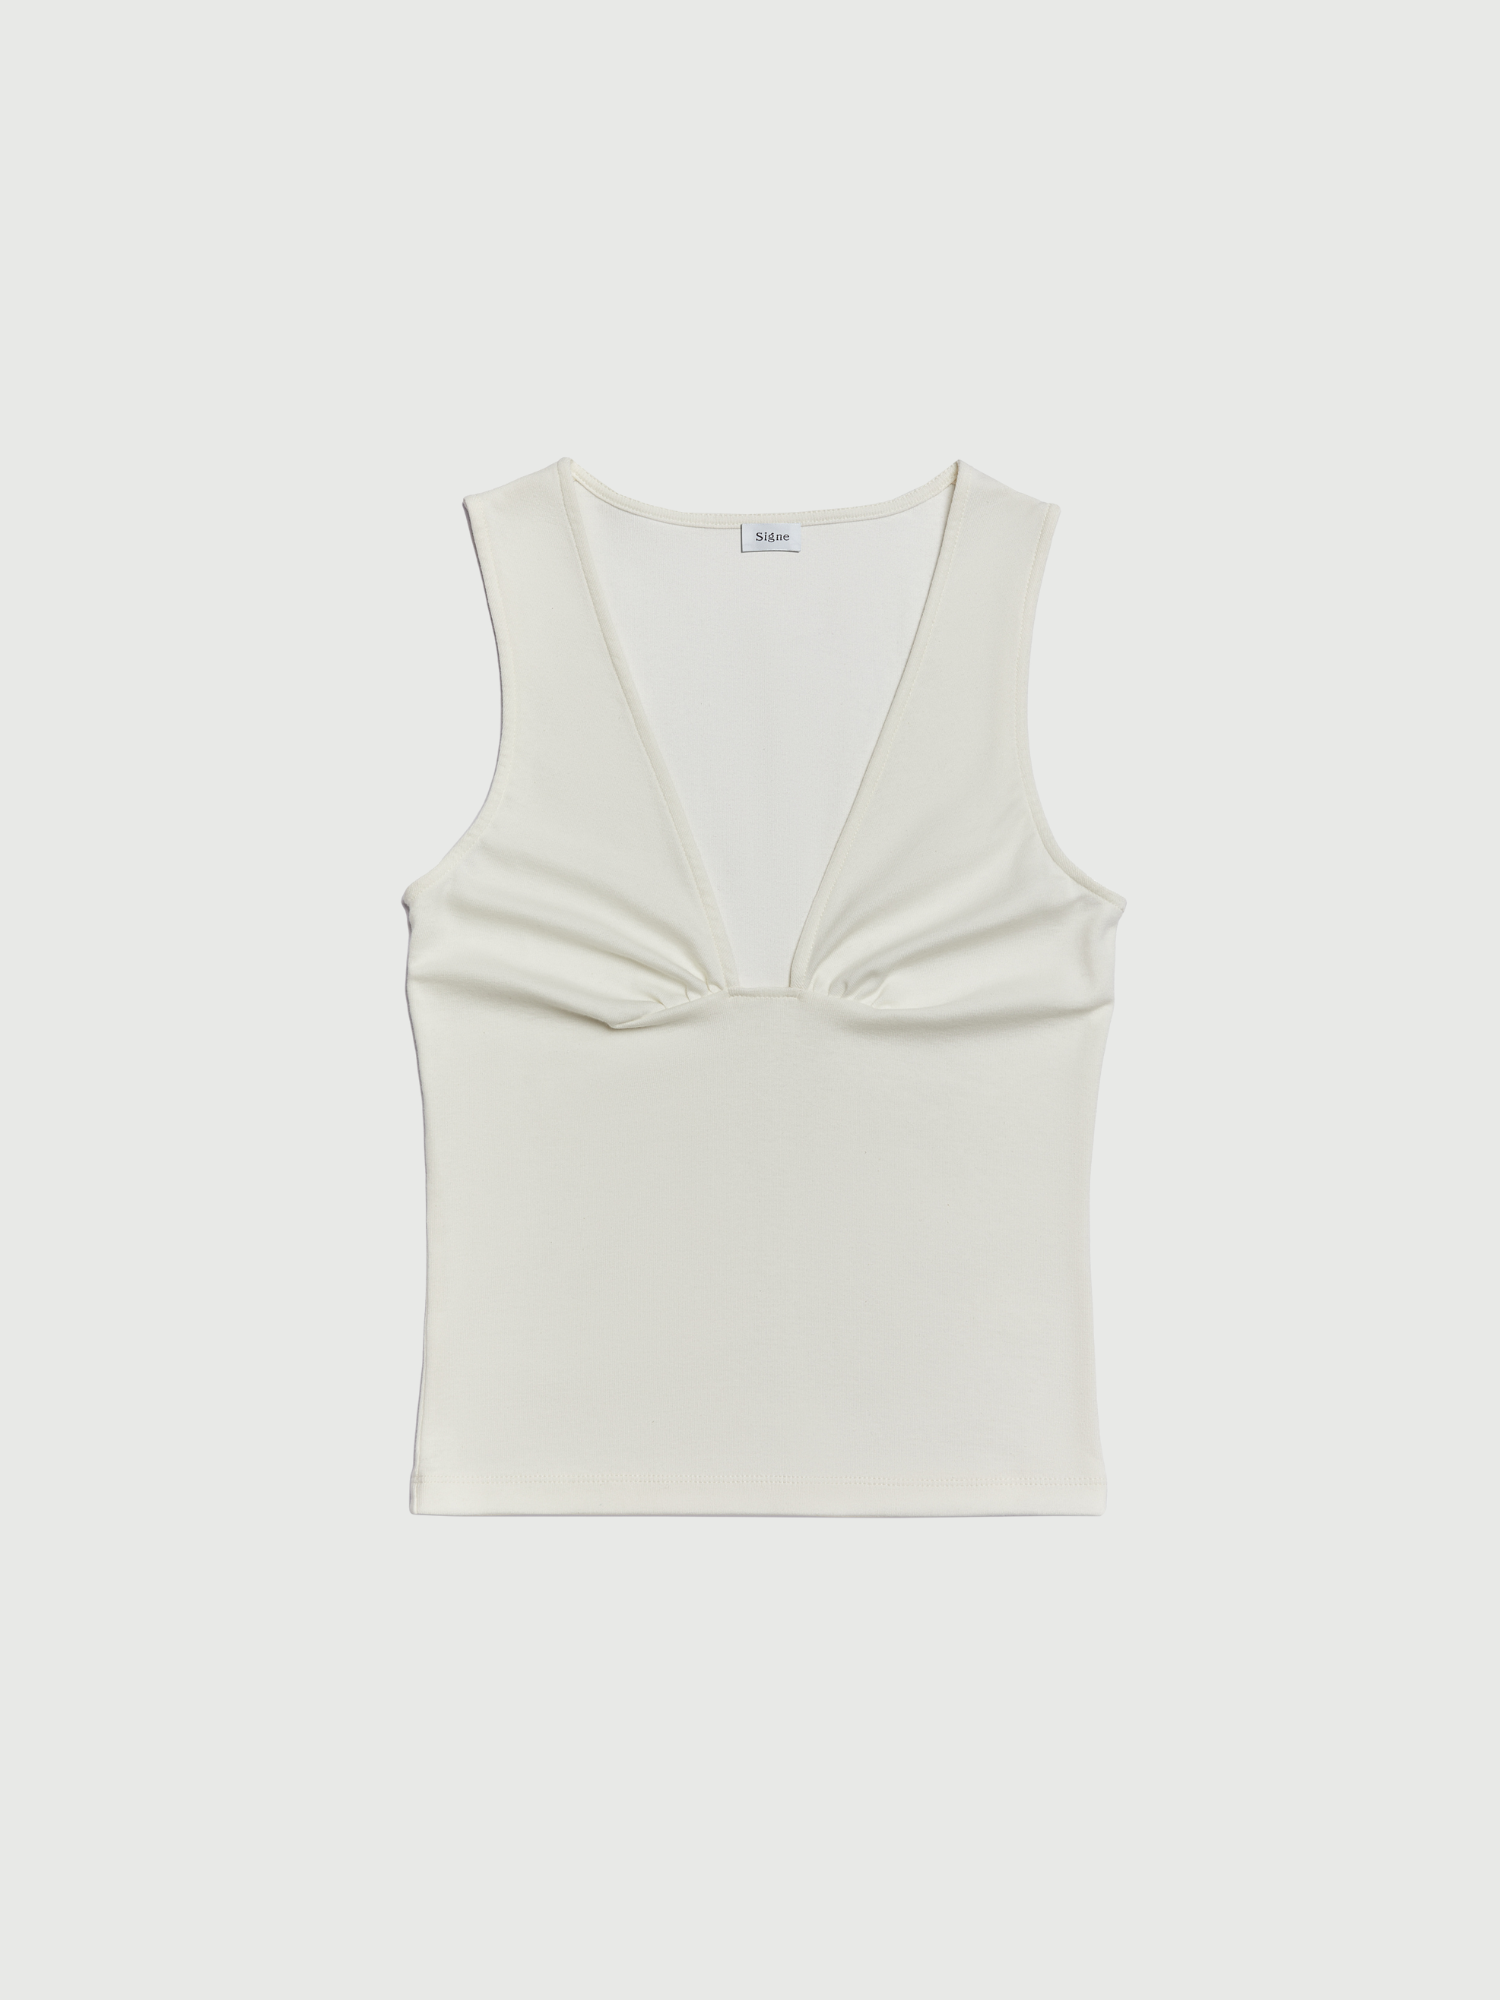 Off-white Square Neck Top  | By Signe